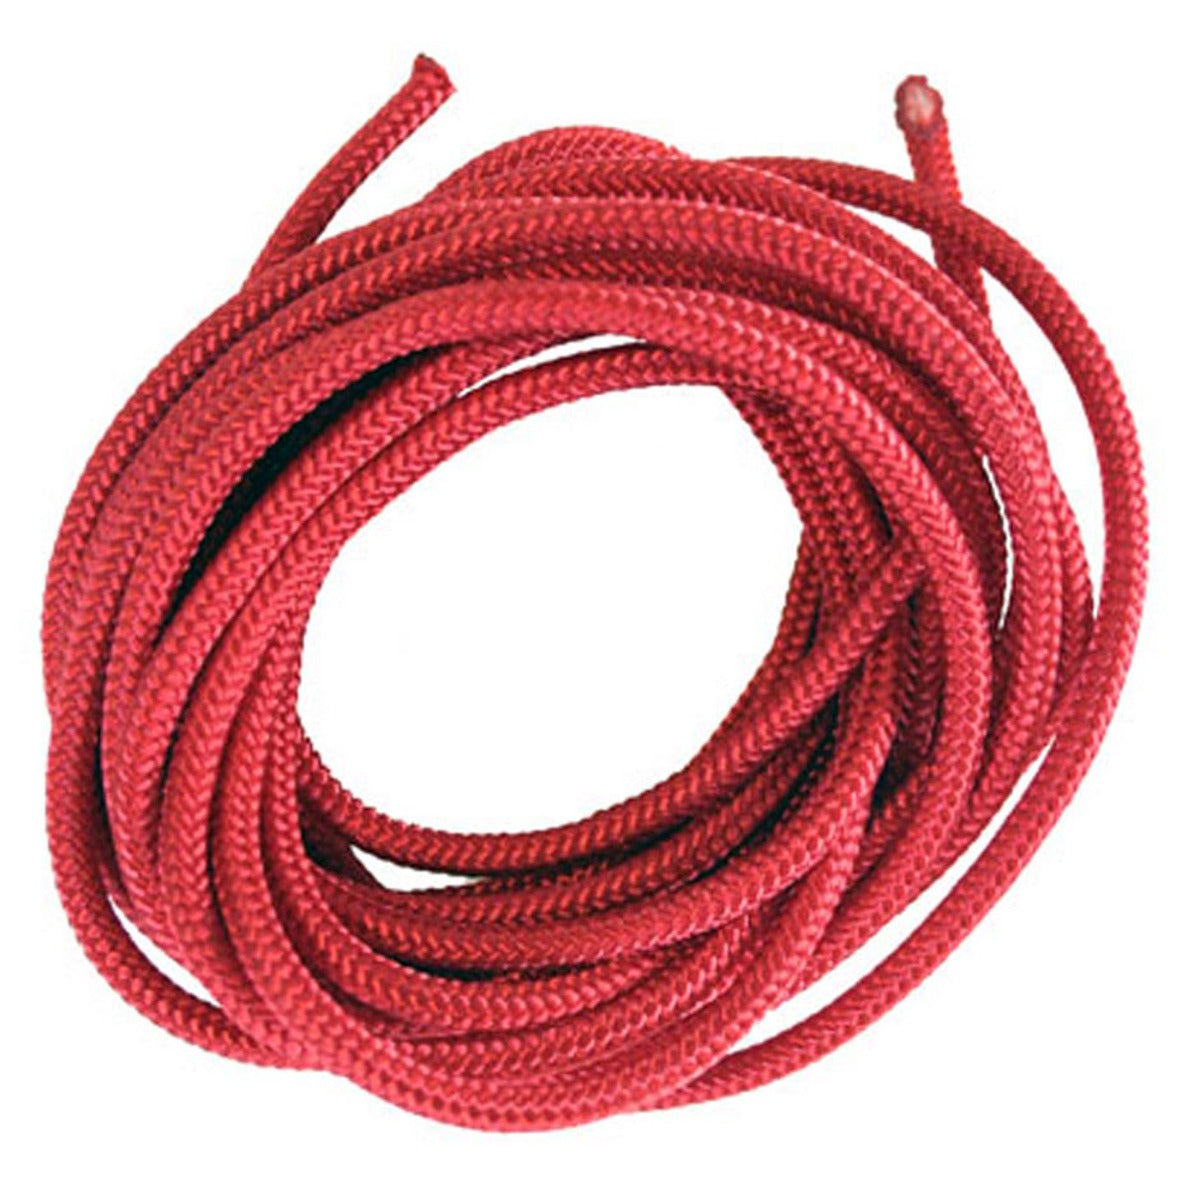 Braided Cord 5mm Red - 5m